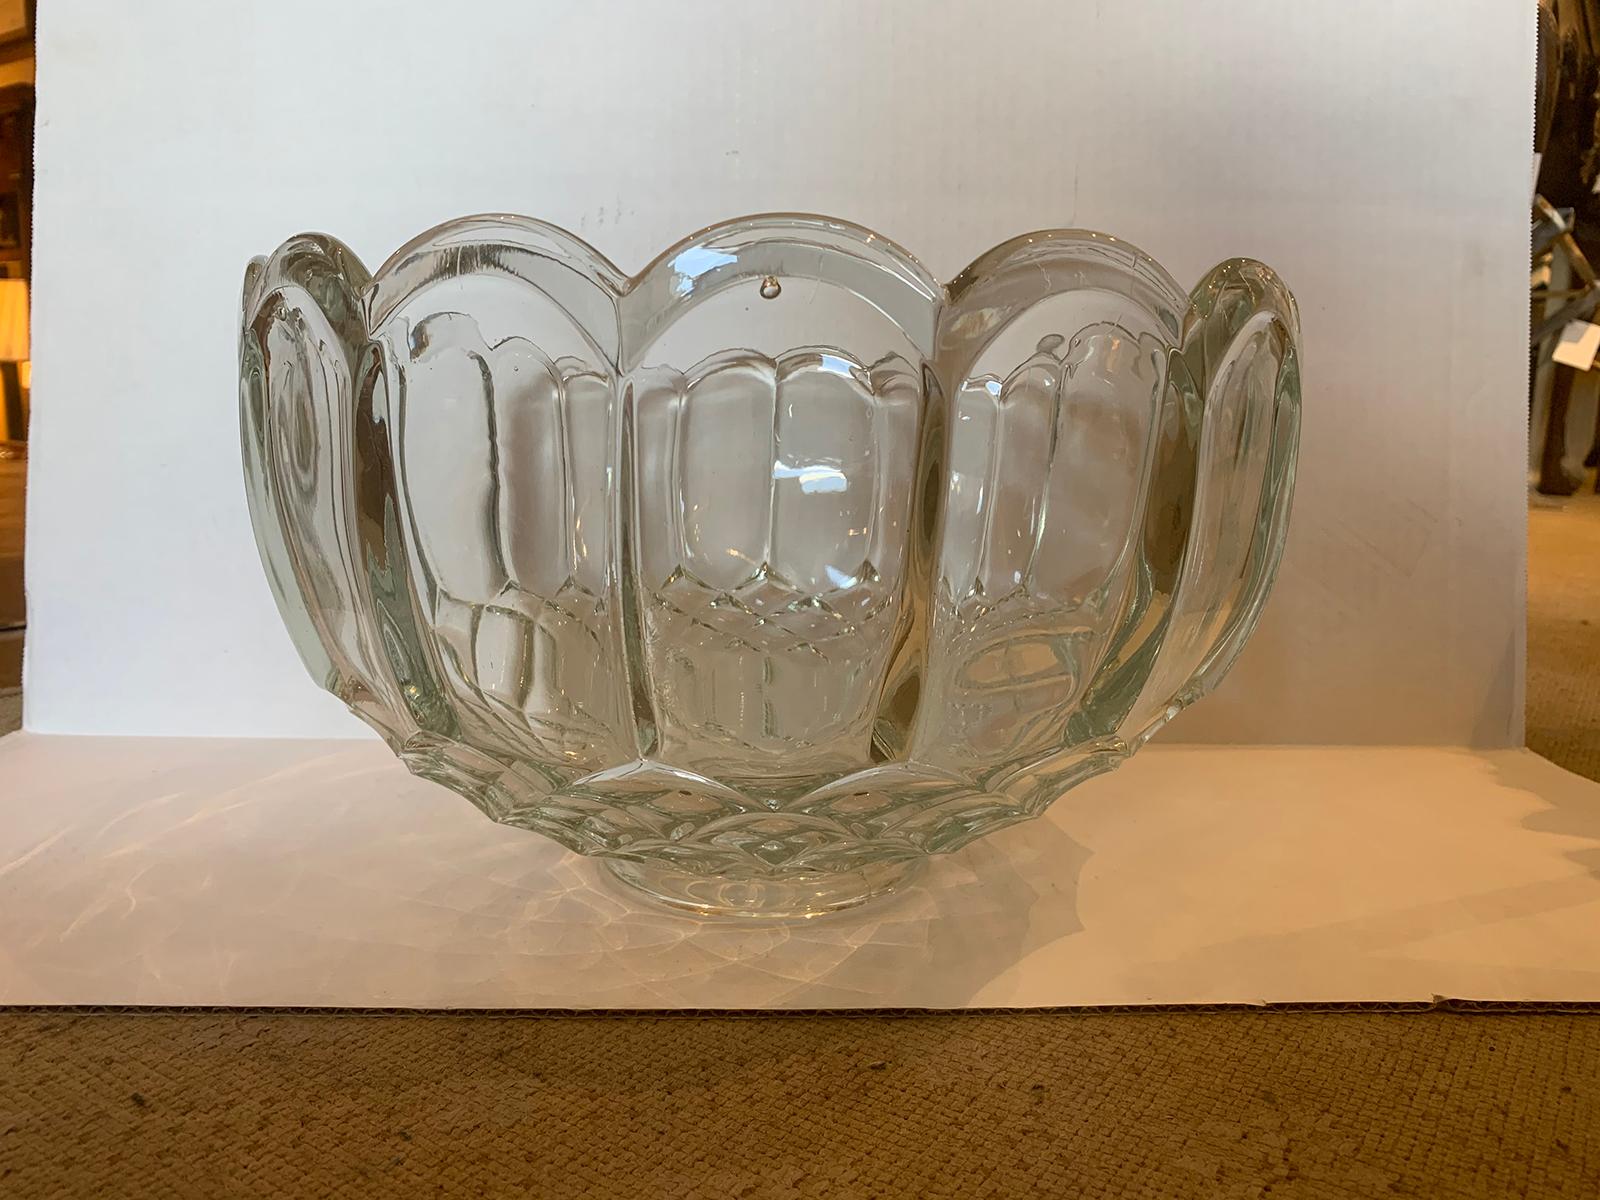 20th century American glass punch bowl.